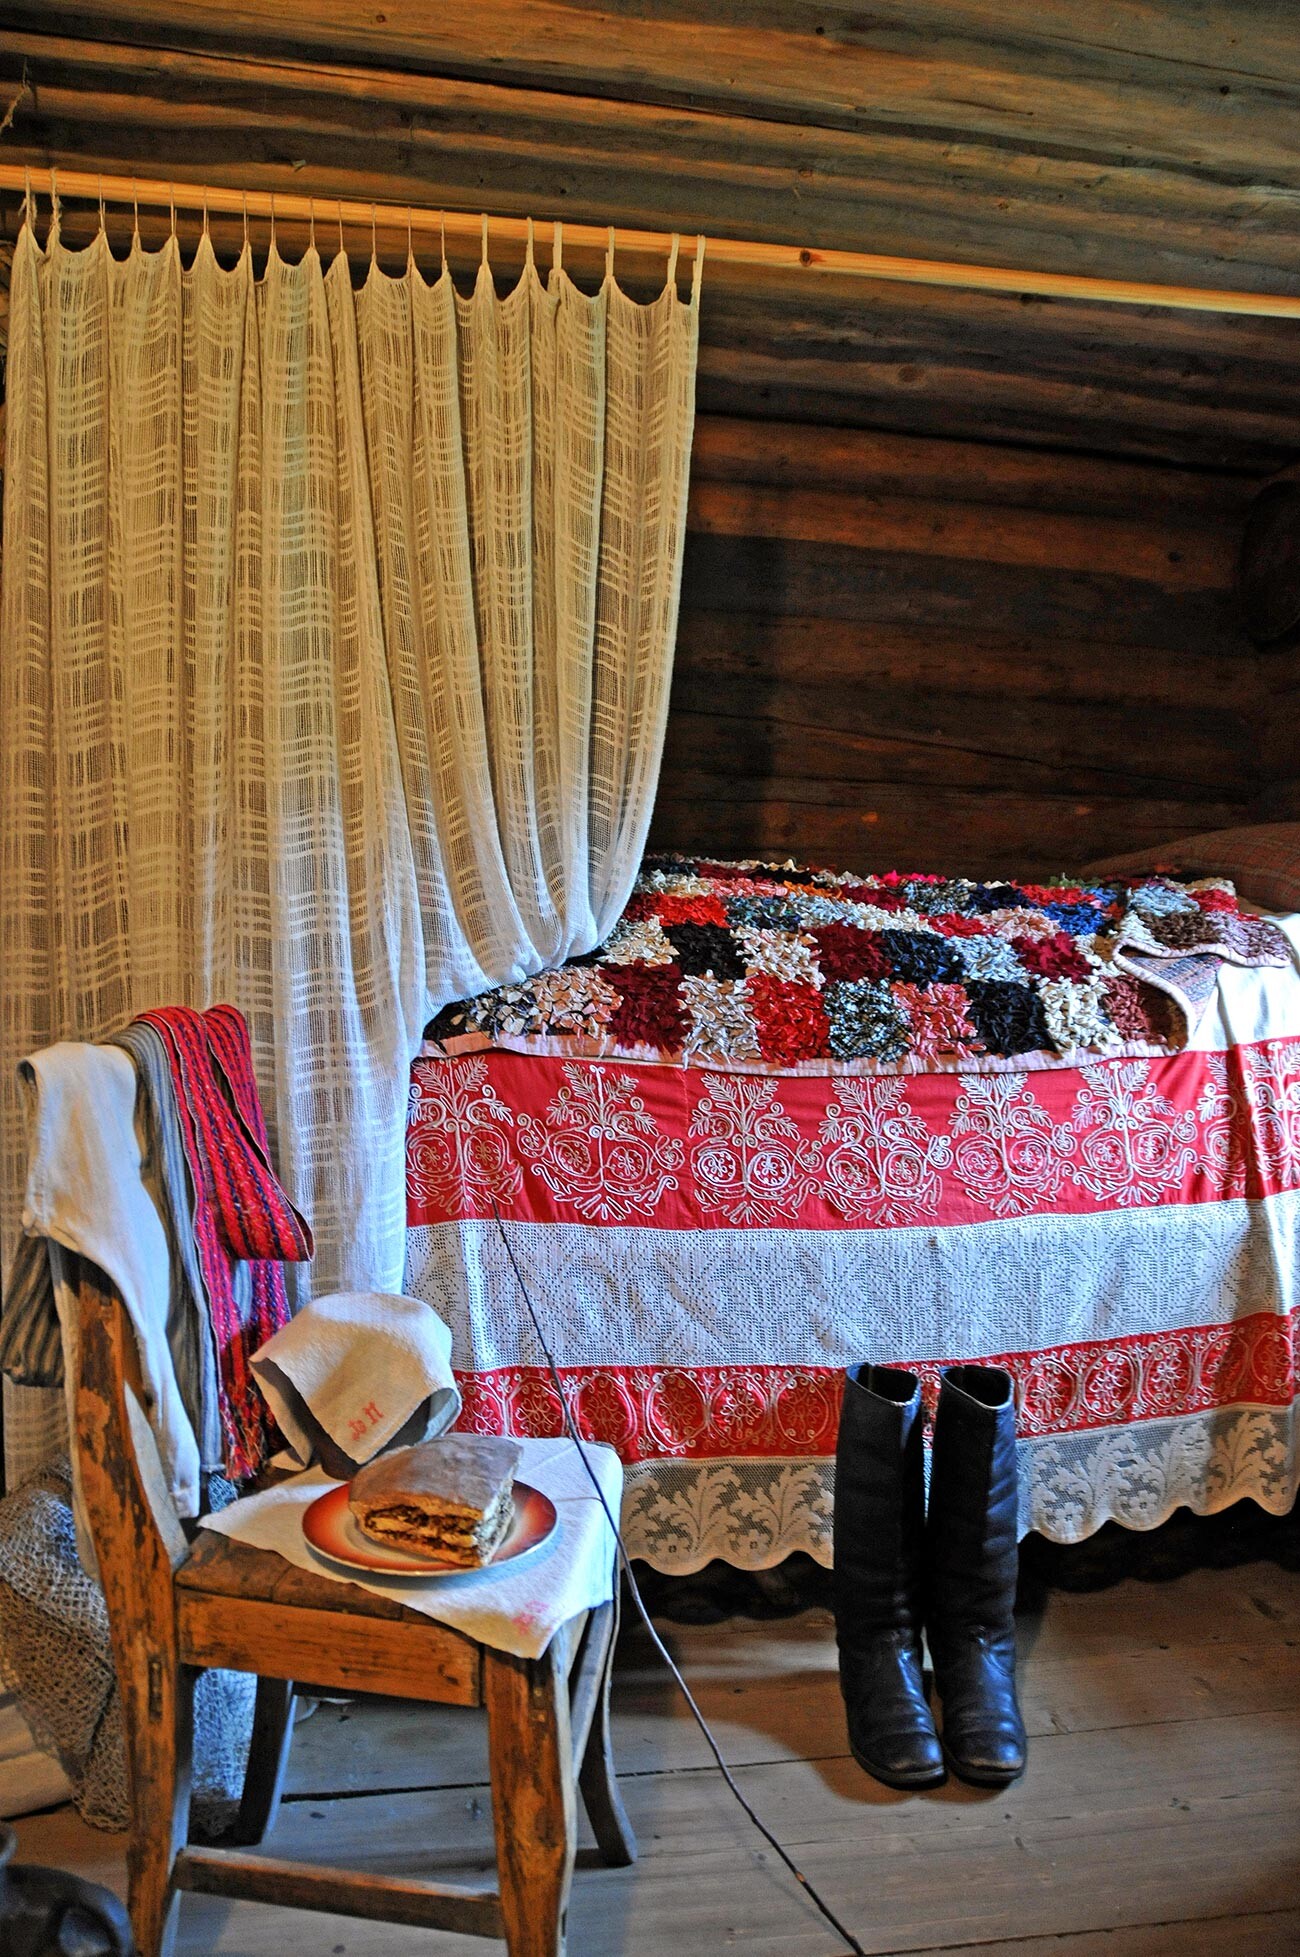 Patchwork quilt in a Russian house